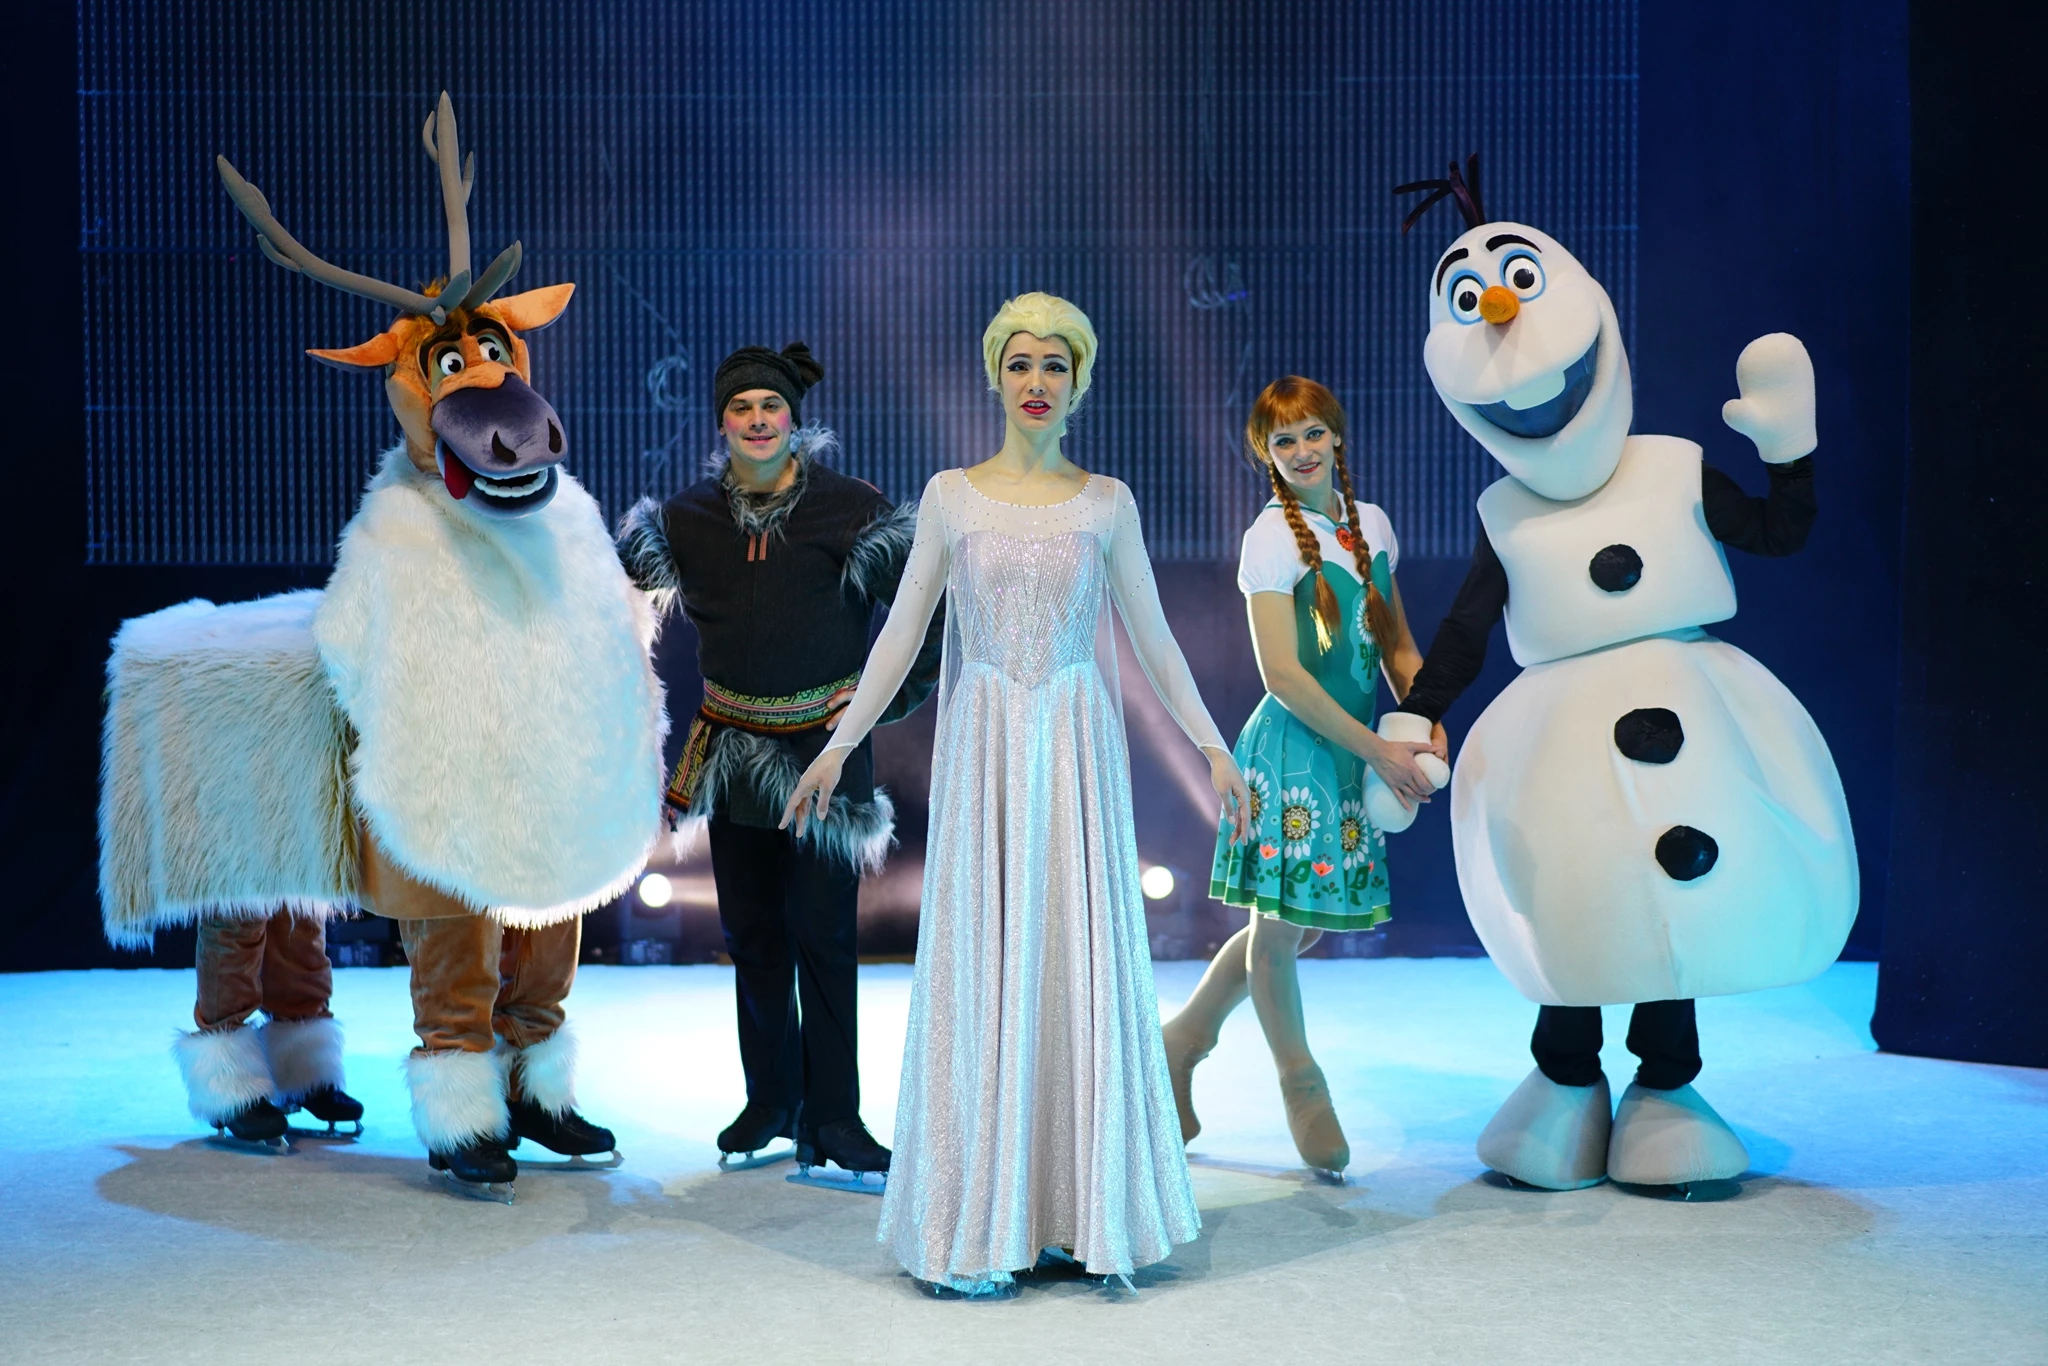 Frozen queen - The music show on ice